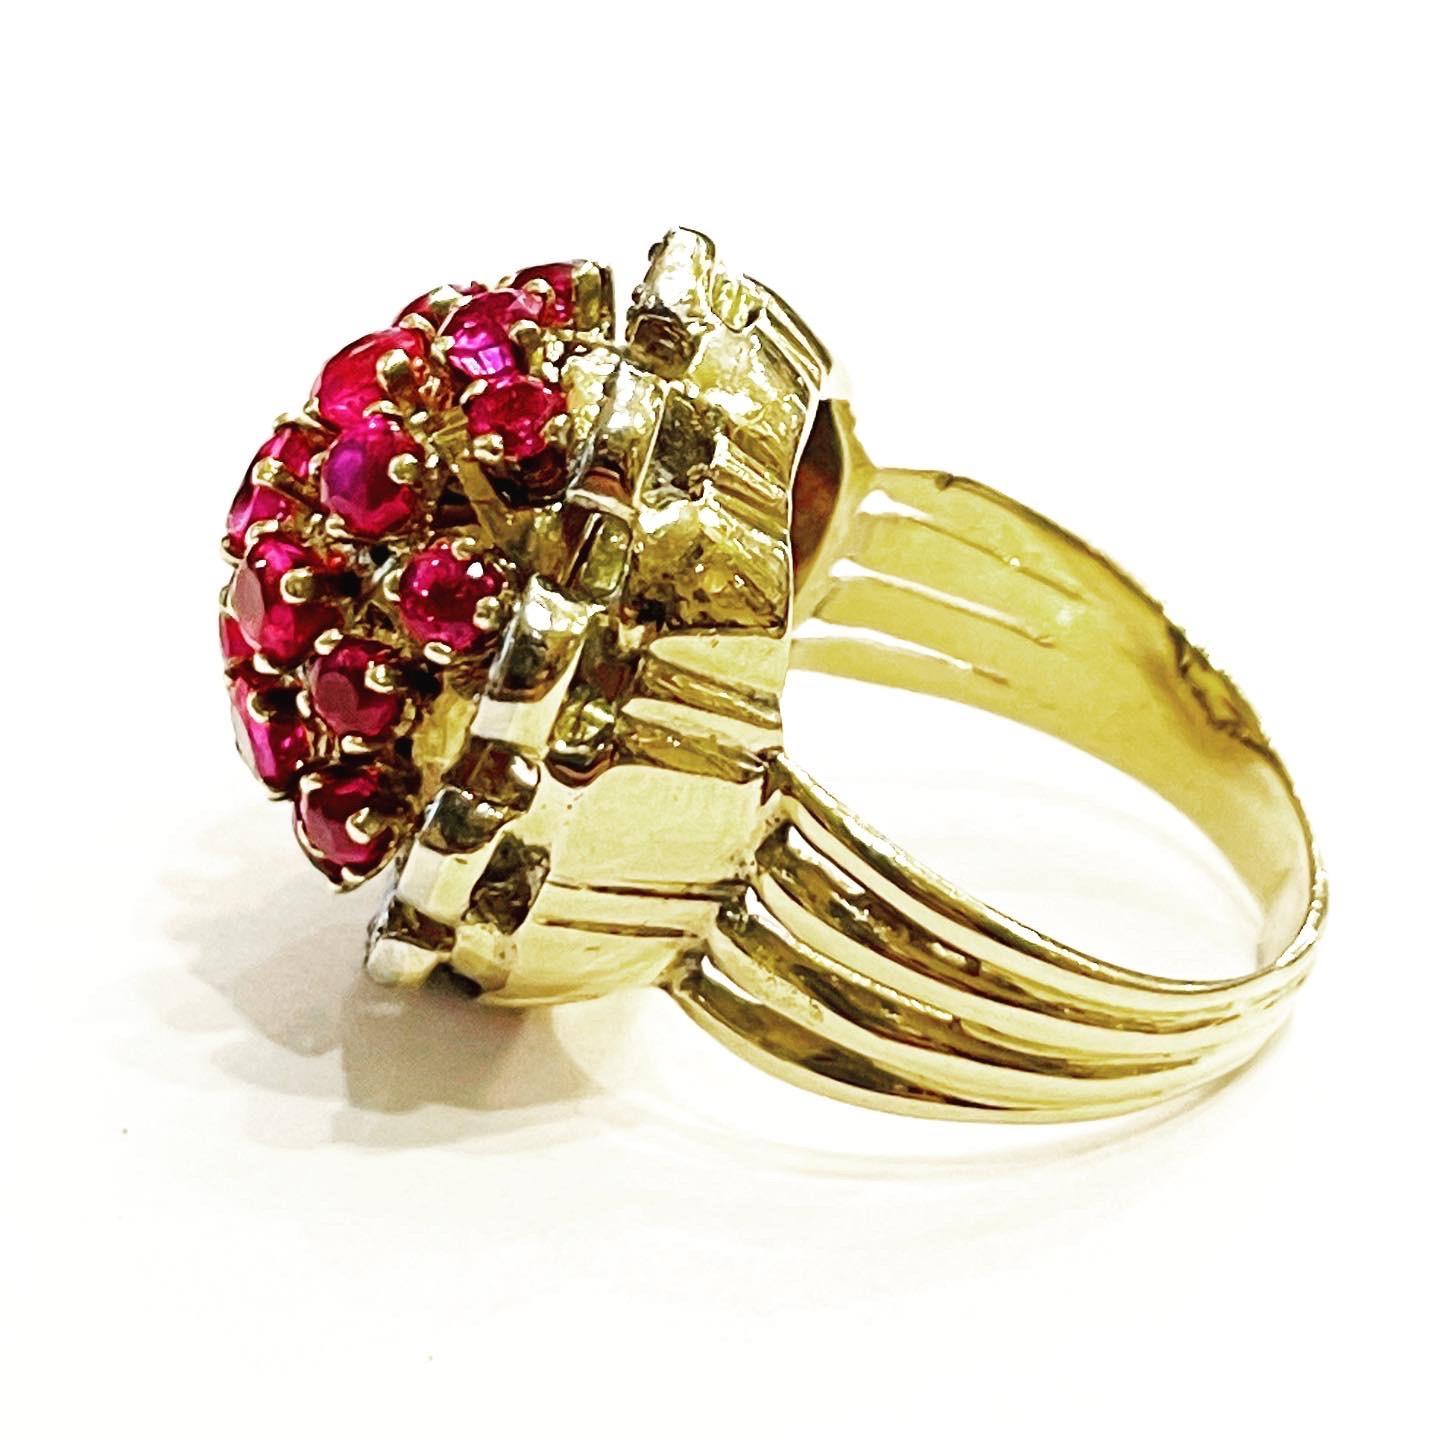 1950s Interchangeable 18kt Gold, Diamond, Pearls, Ruby, Sapphire Fashion Ring 2